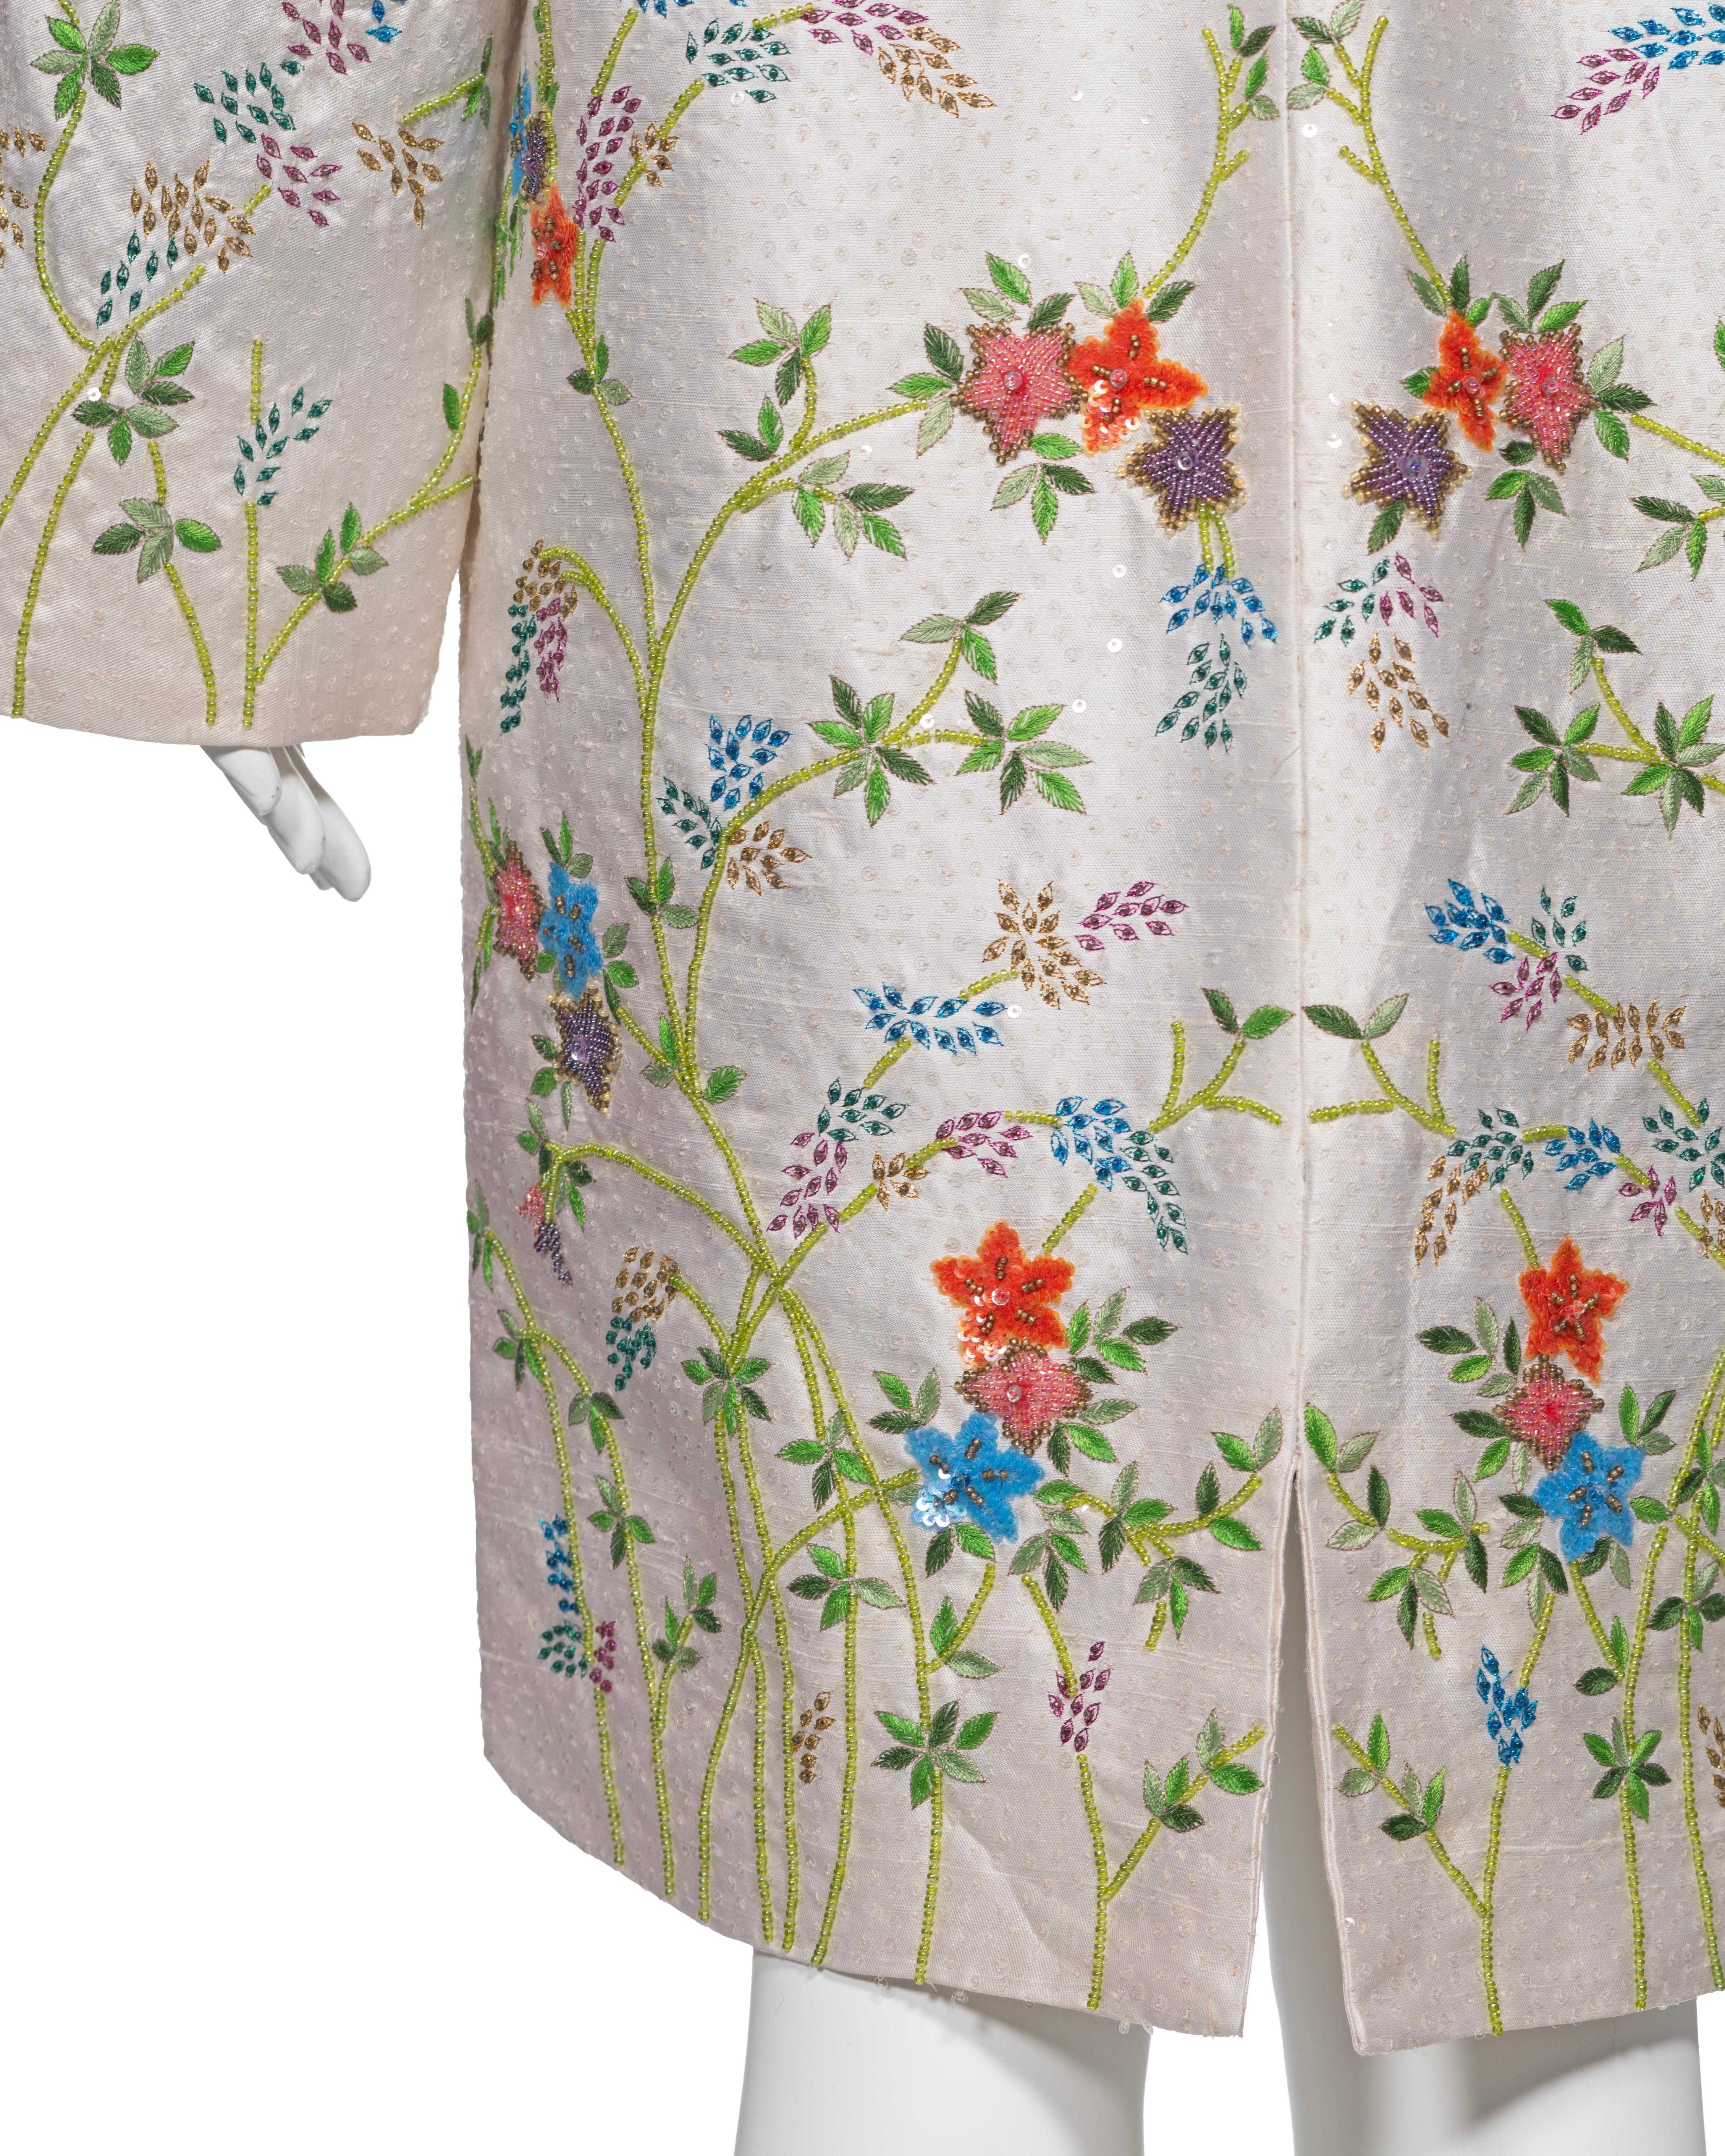 Dolce & Gabbana Hand-Embroidered White Raw Silk Evening Couture Coat, ss 1997 For Sale 11